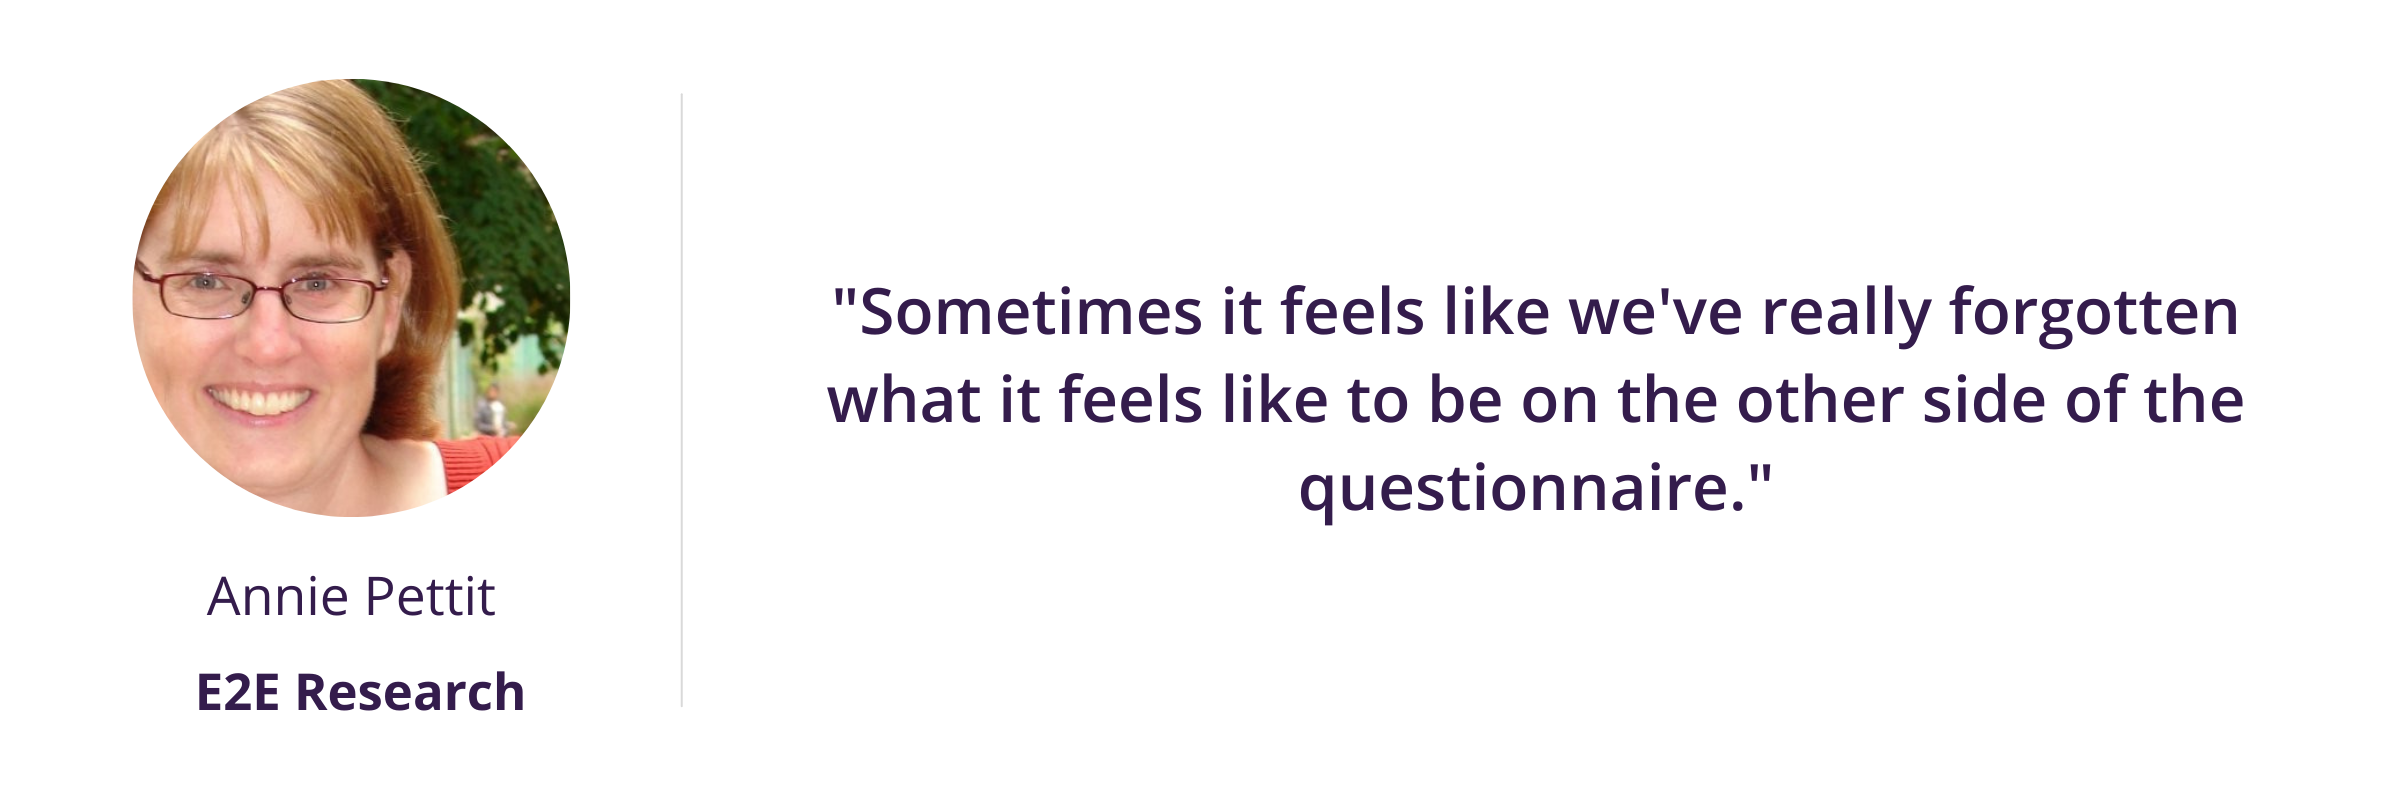 "Sometimes it feels like we've really forgotten what it feels like to be on the other side of the questionnaire."